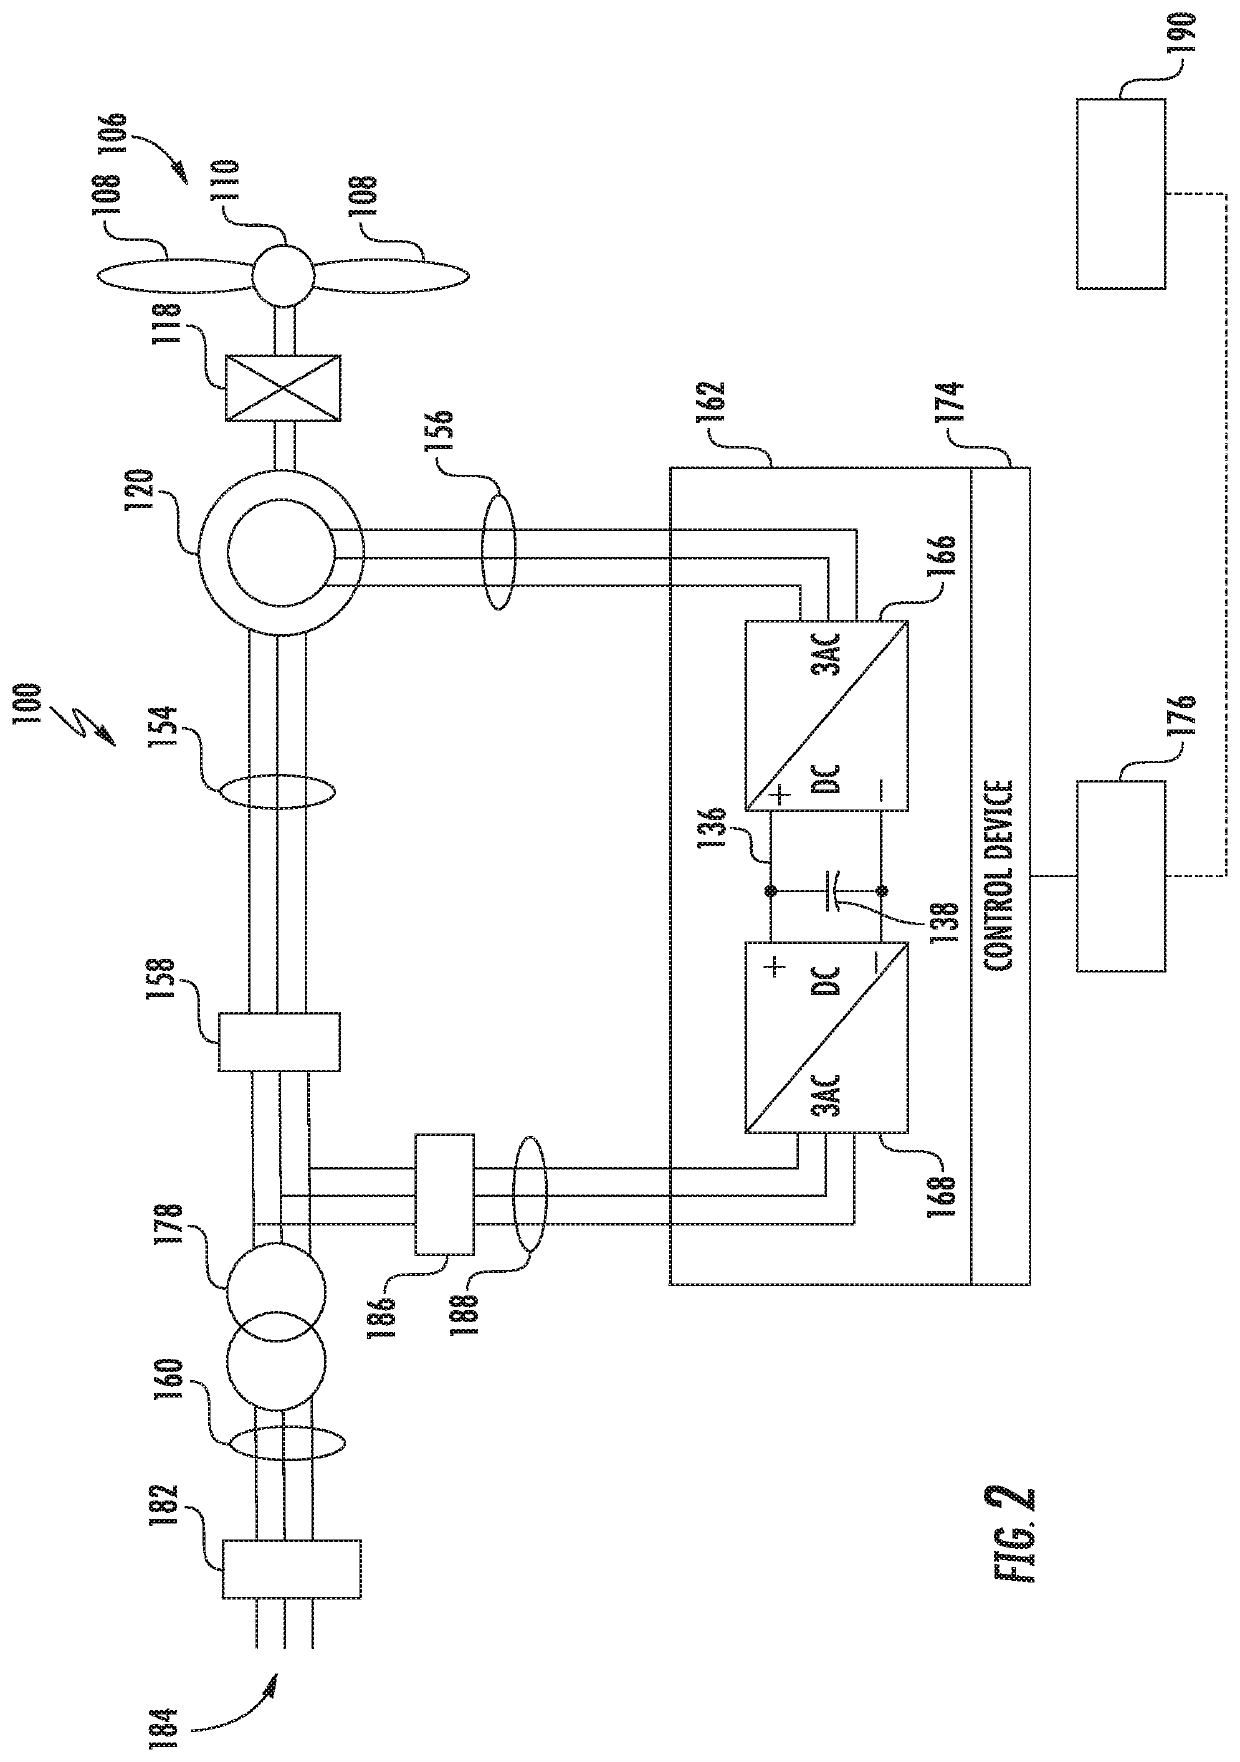 Allocating reactive power production for doubly fed induction generator wind turbine system